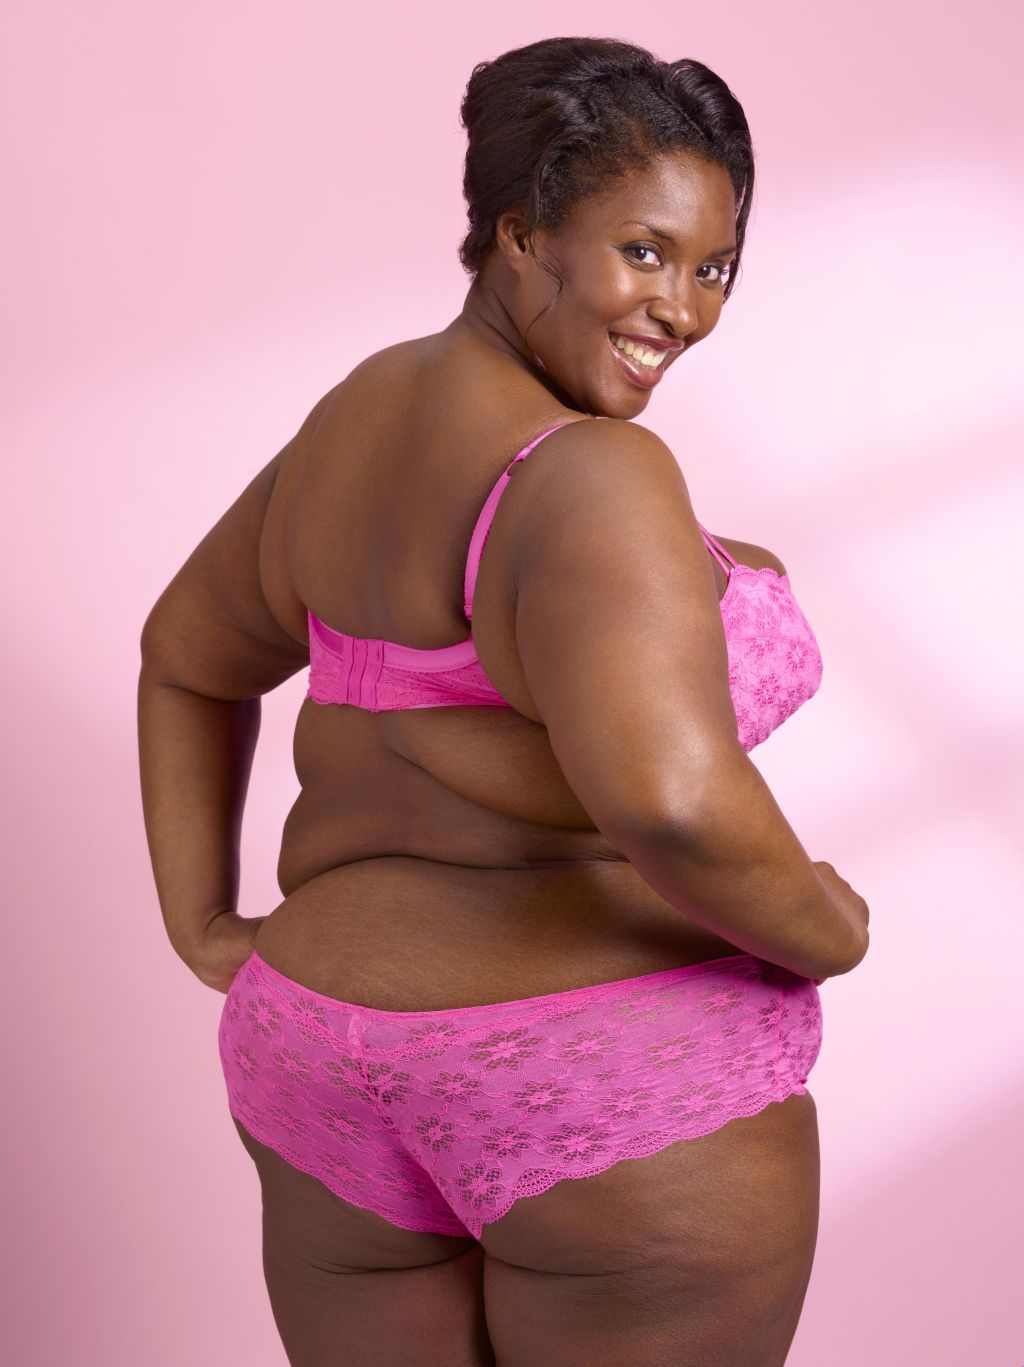 Overweight woman on pink background